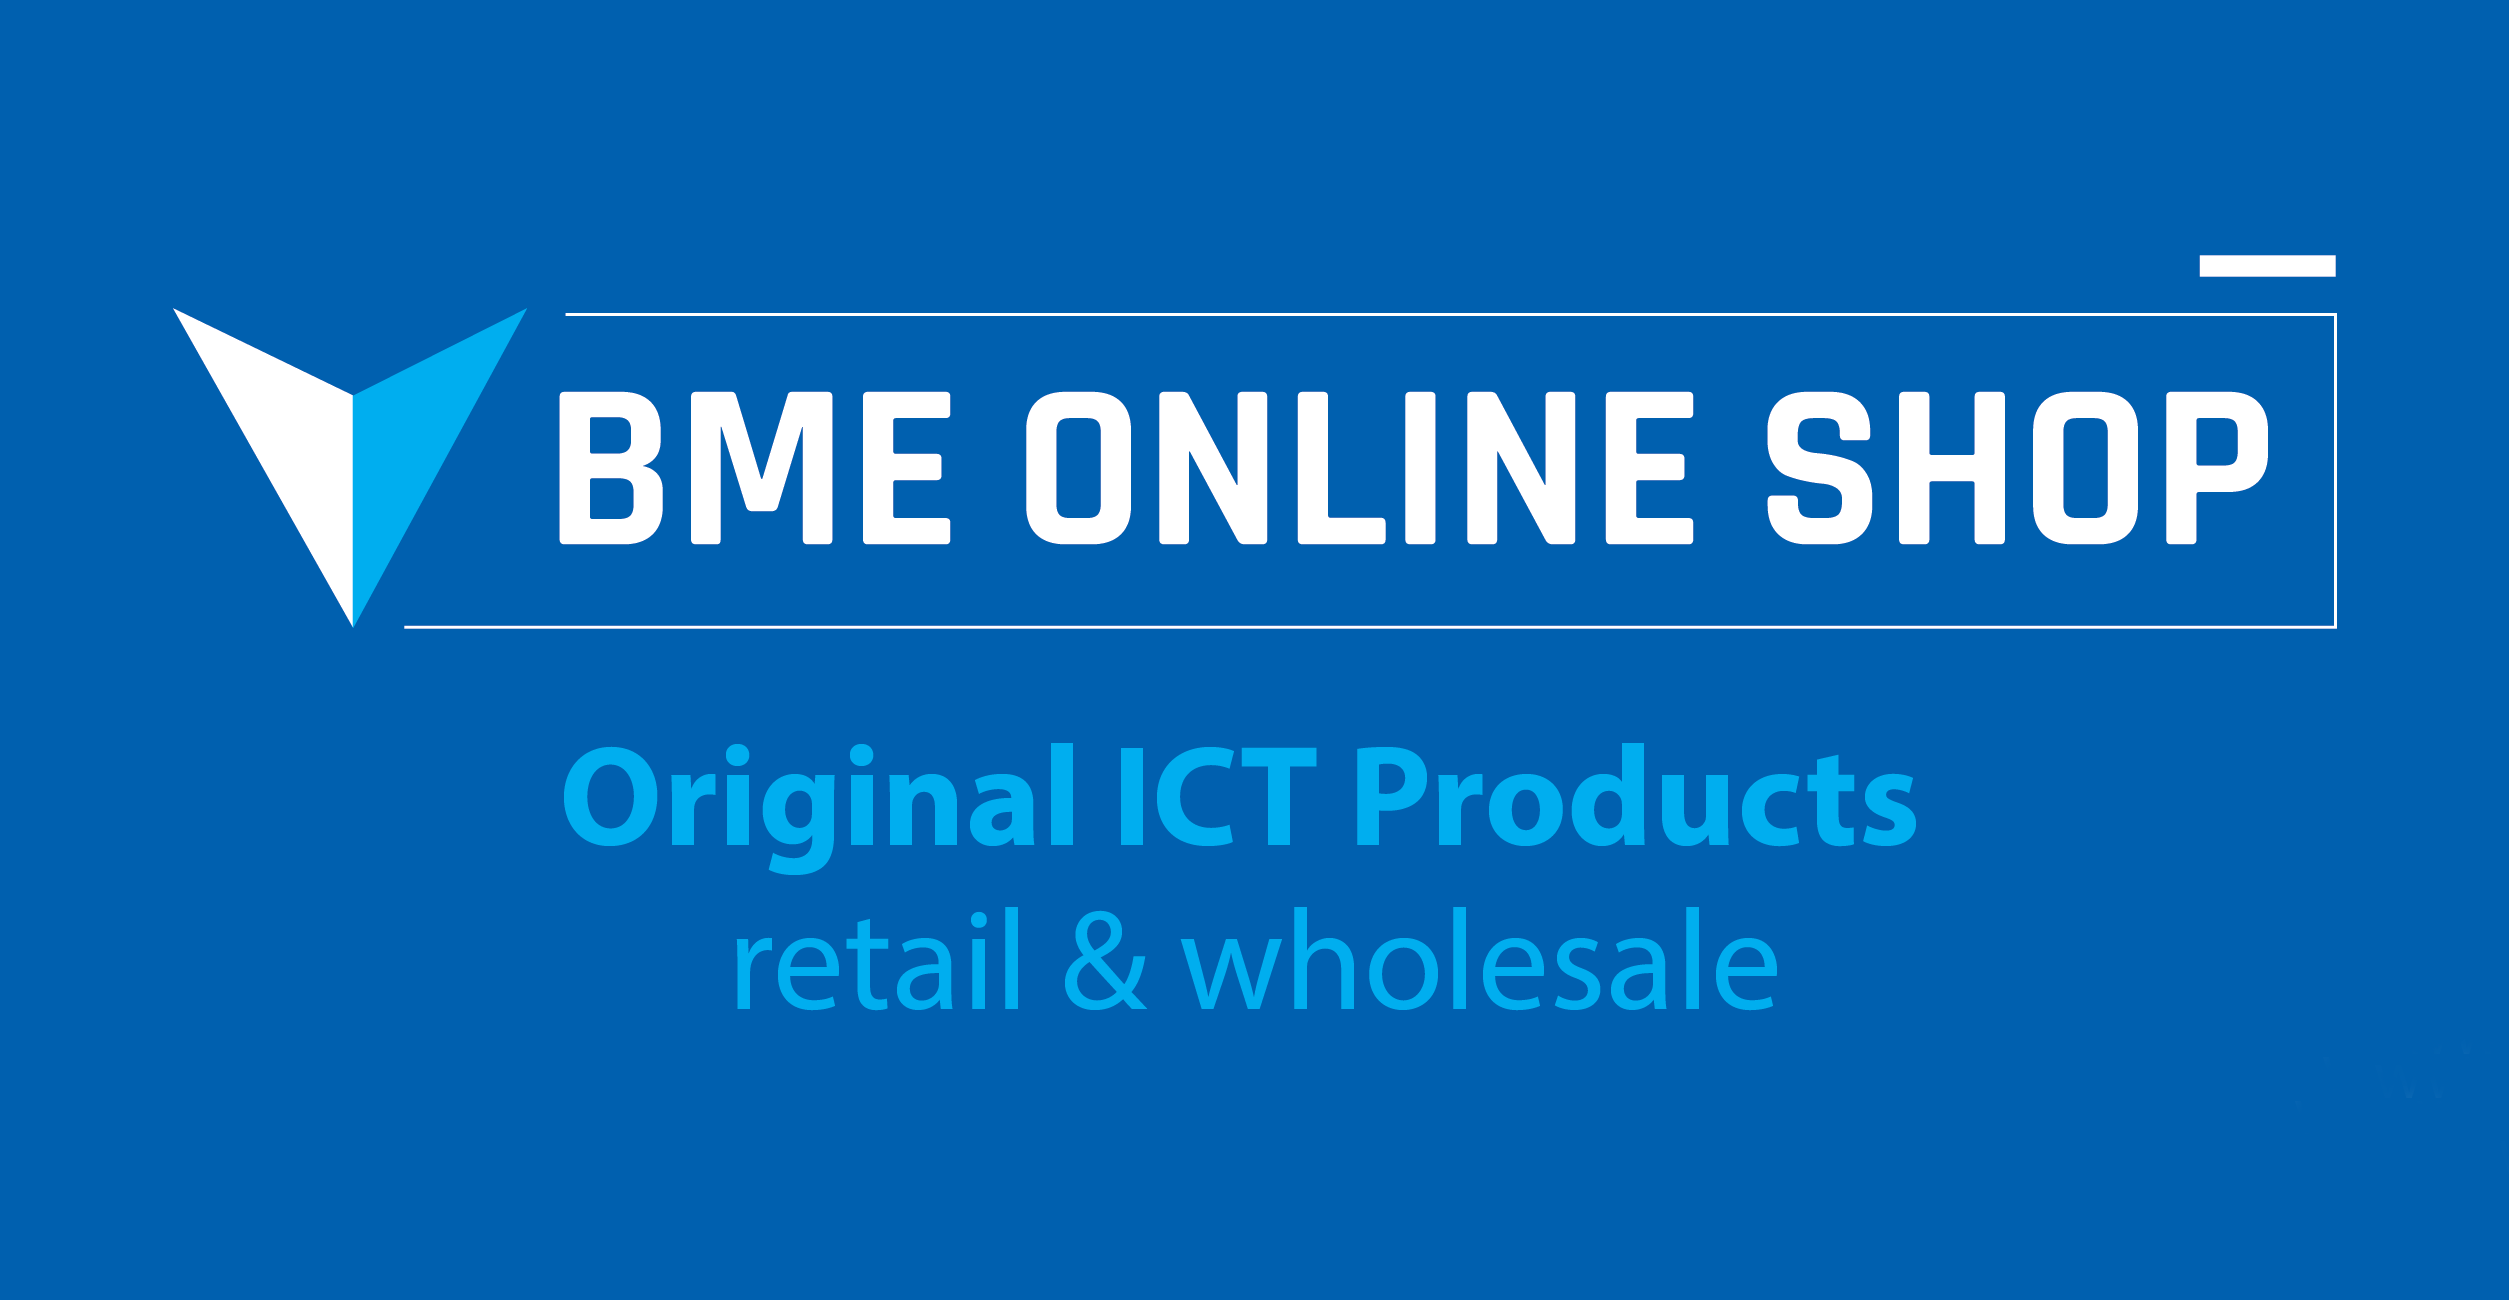 BME - Computer, Printer, Offices & Banking Products Retailer In Bangladesh promo